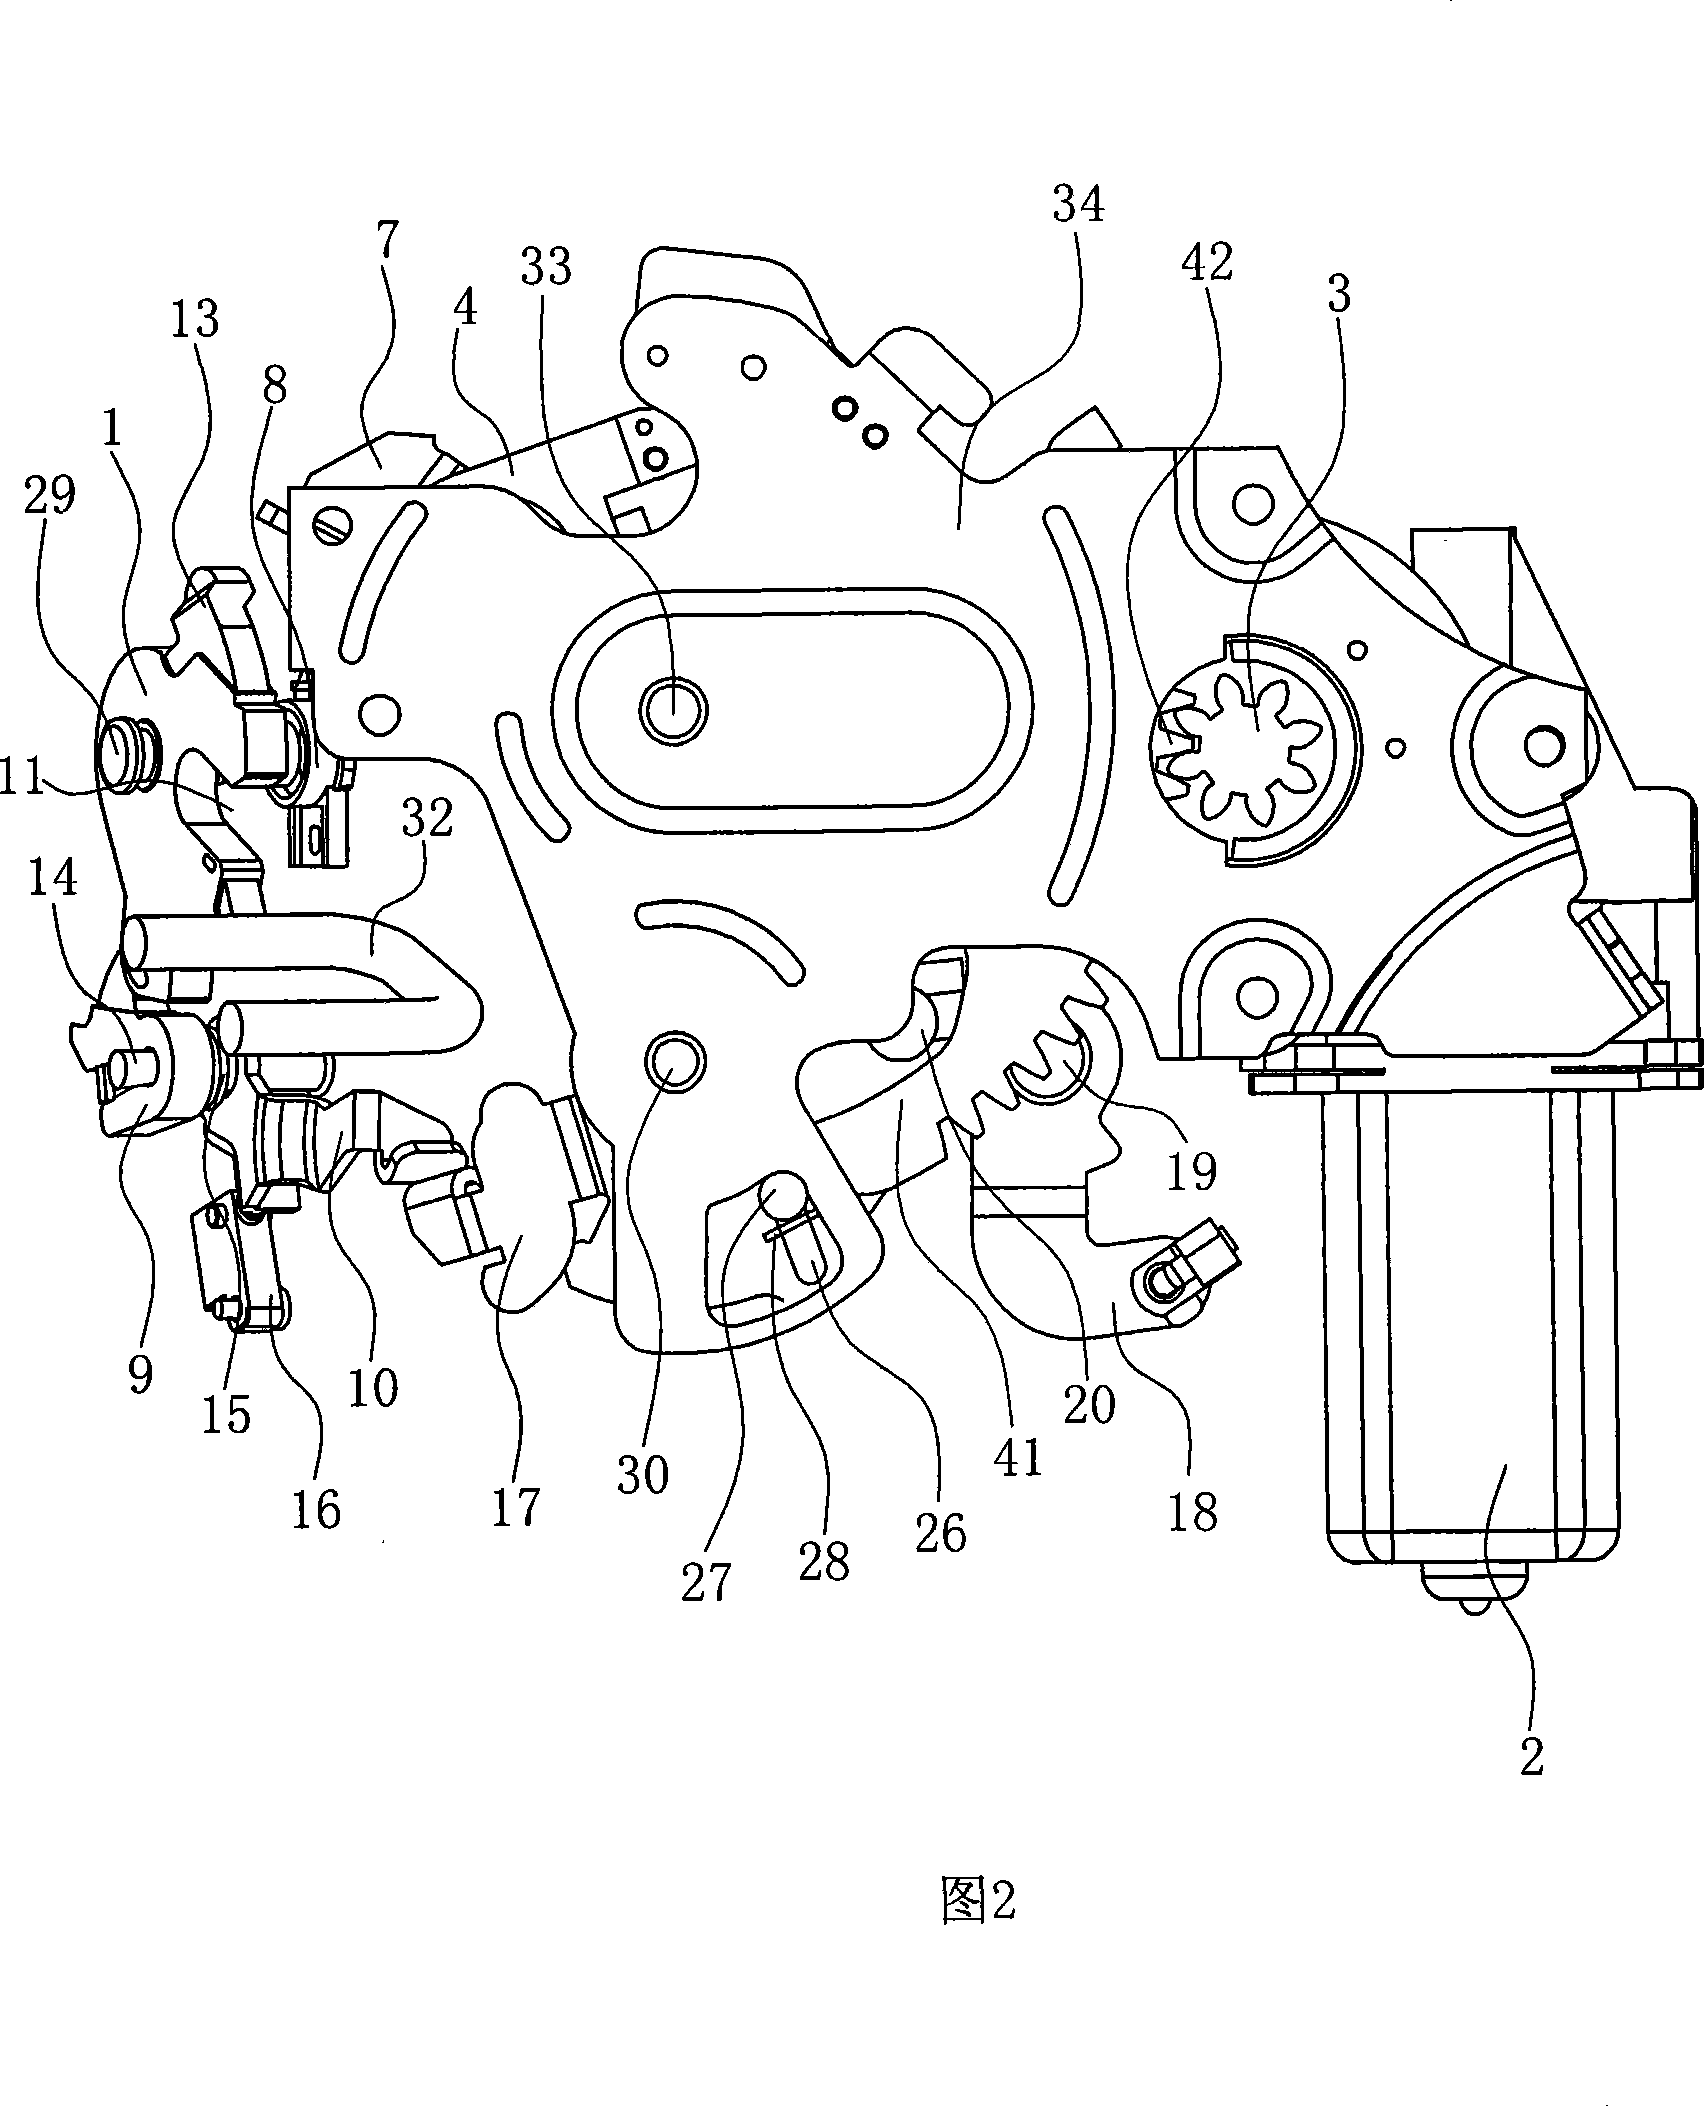 Full-automatic electric door lock for vehicle